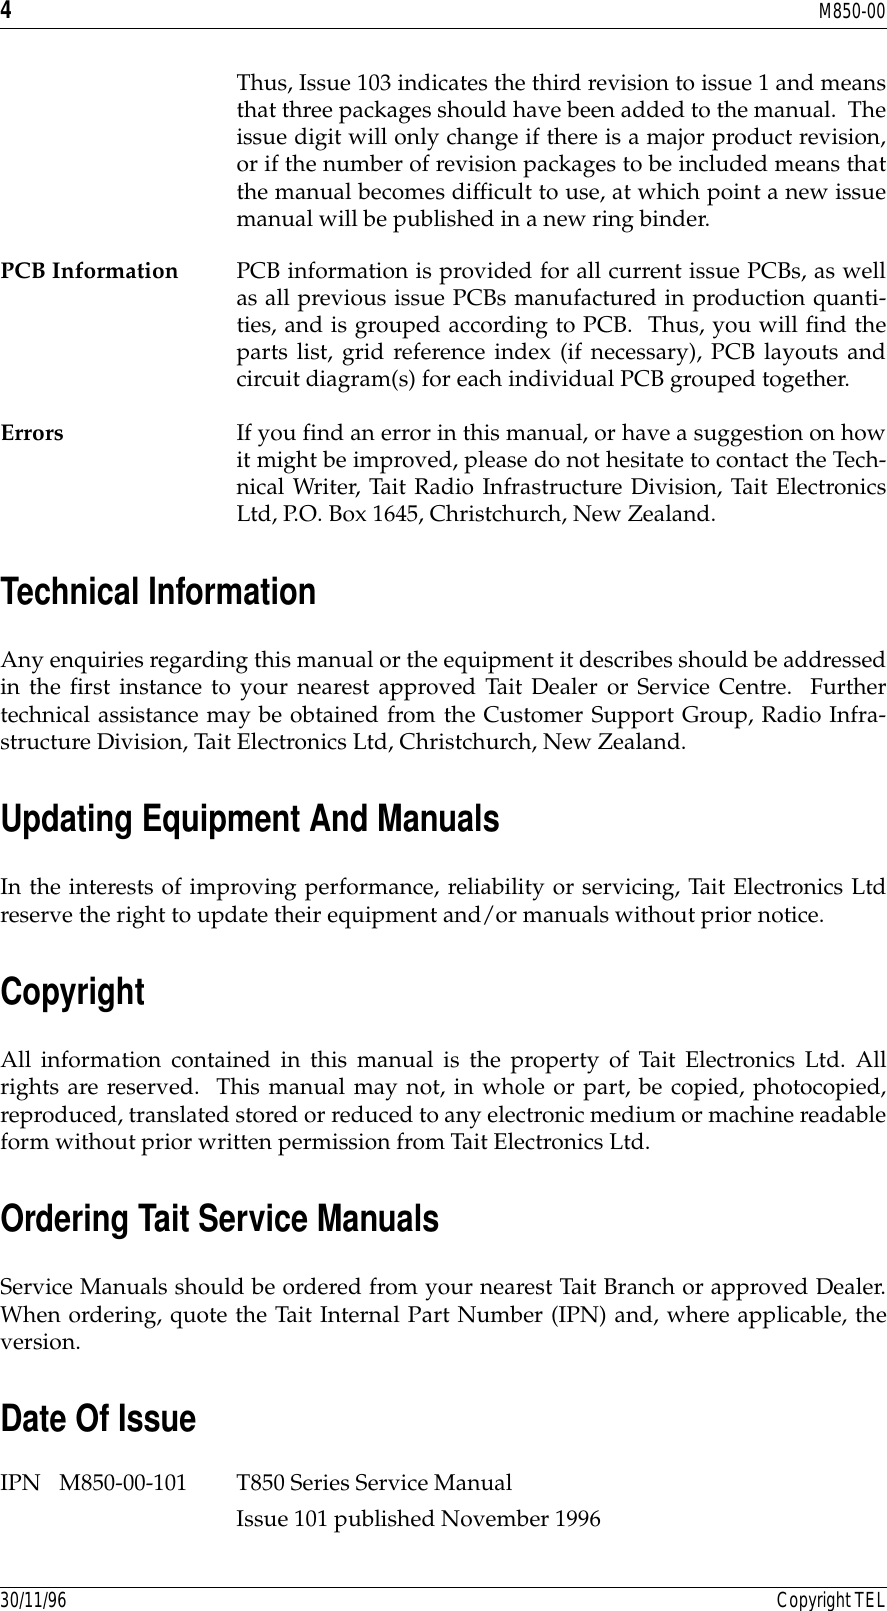 Page 4 of 12 - M850-00-101 T800/T800 SERIES 1 MANUALS/M850-00-101/Pages 1-12 Pages